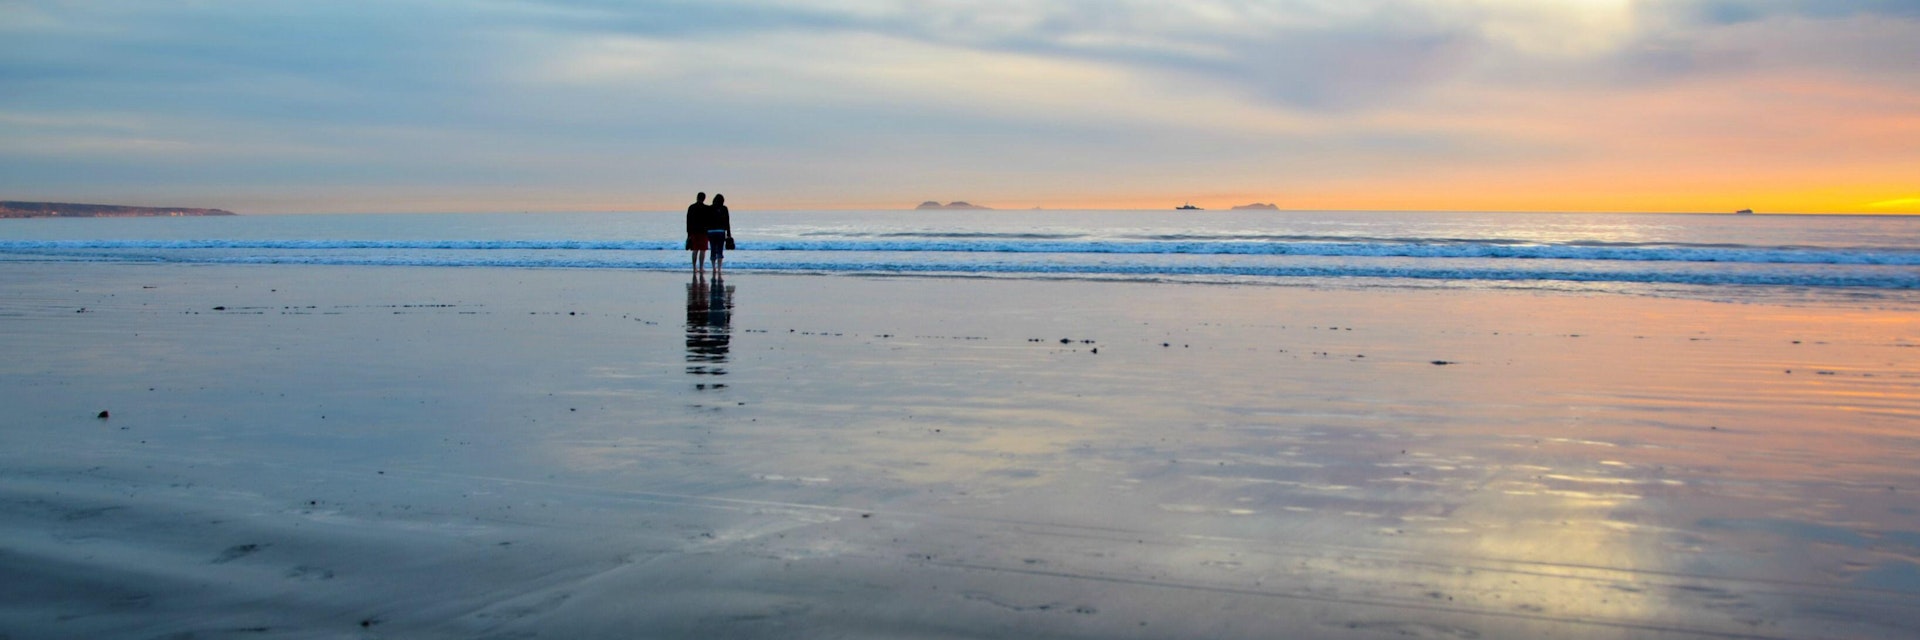 2E5BKXB Young couple silhouettes on the Silver Strand Beach wet sand  watching the sunset at Coronado Island, San Diego Southern California USA.